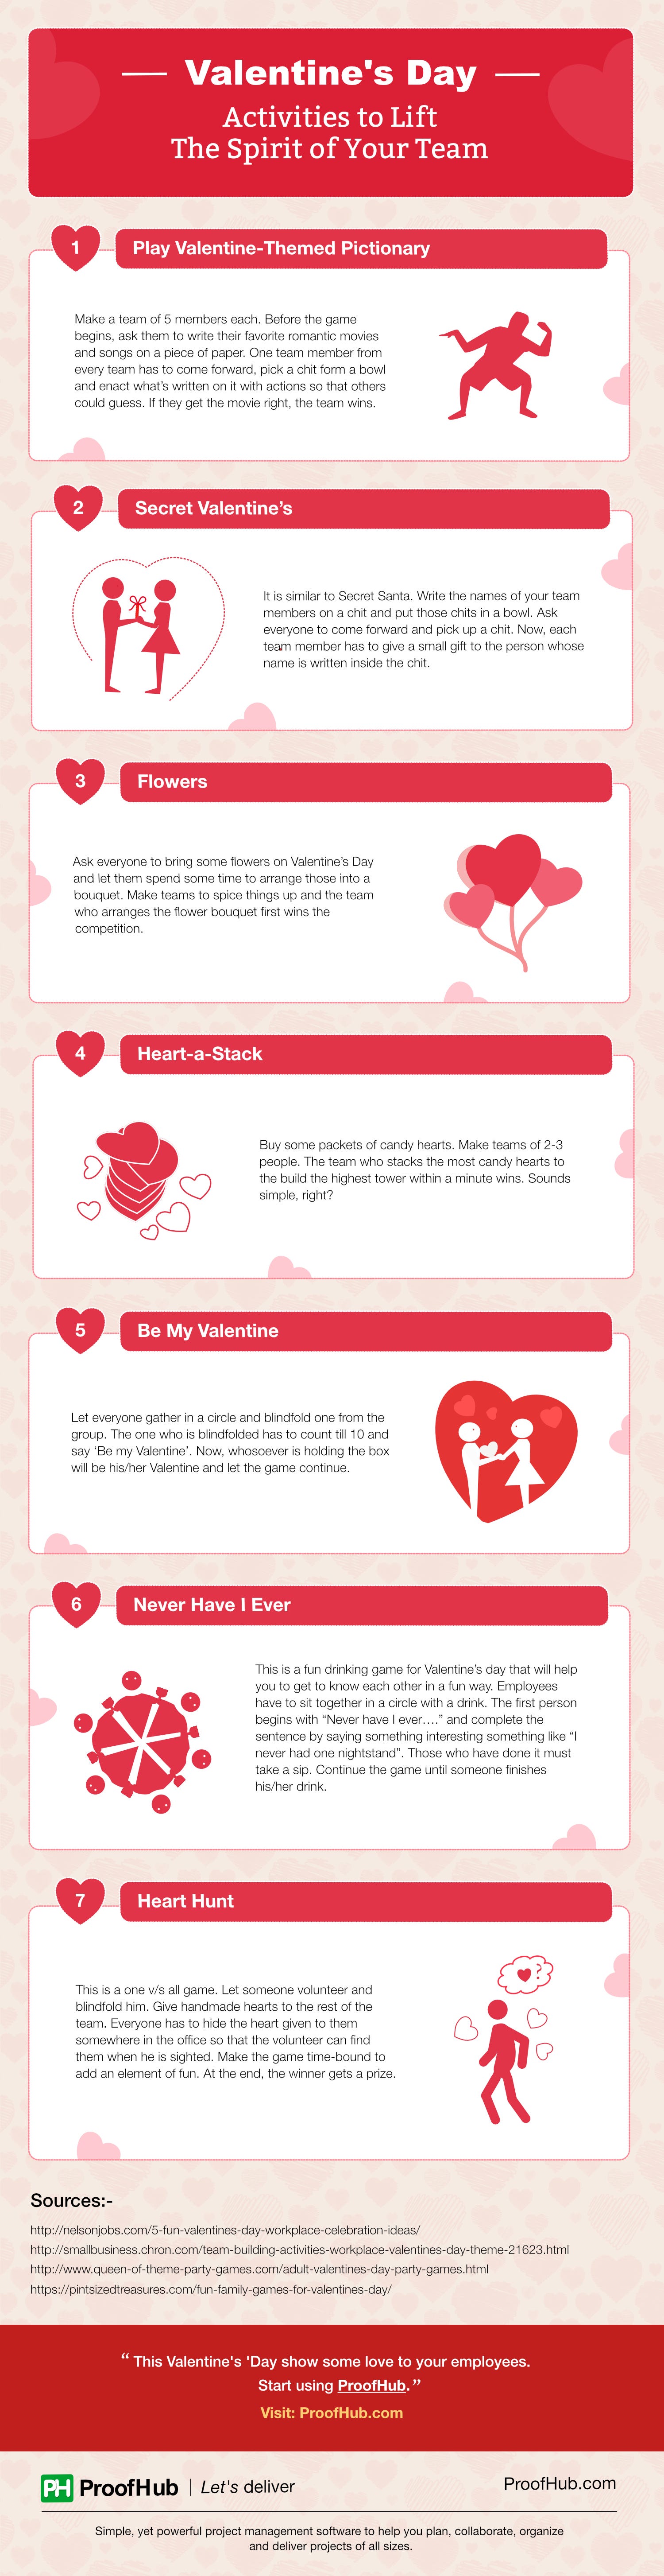 fun-team-building-activities-for-valentine-s-day-by-proofhub